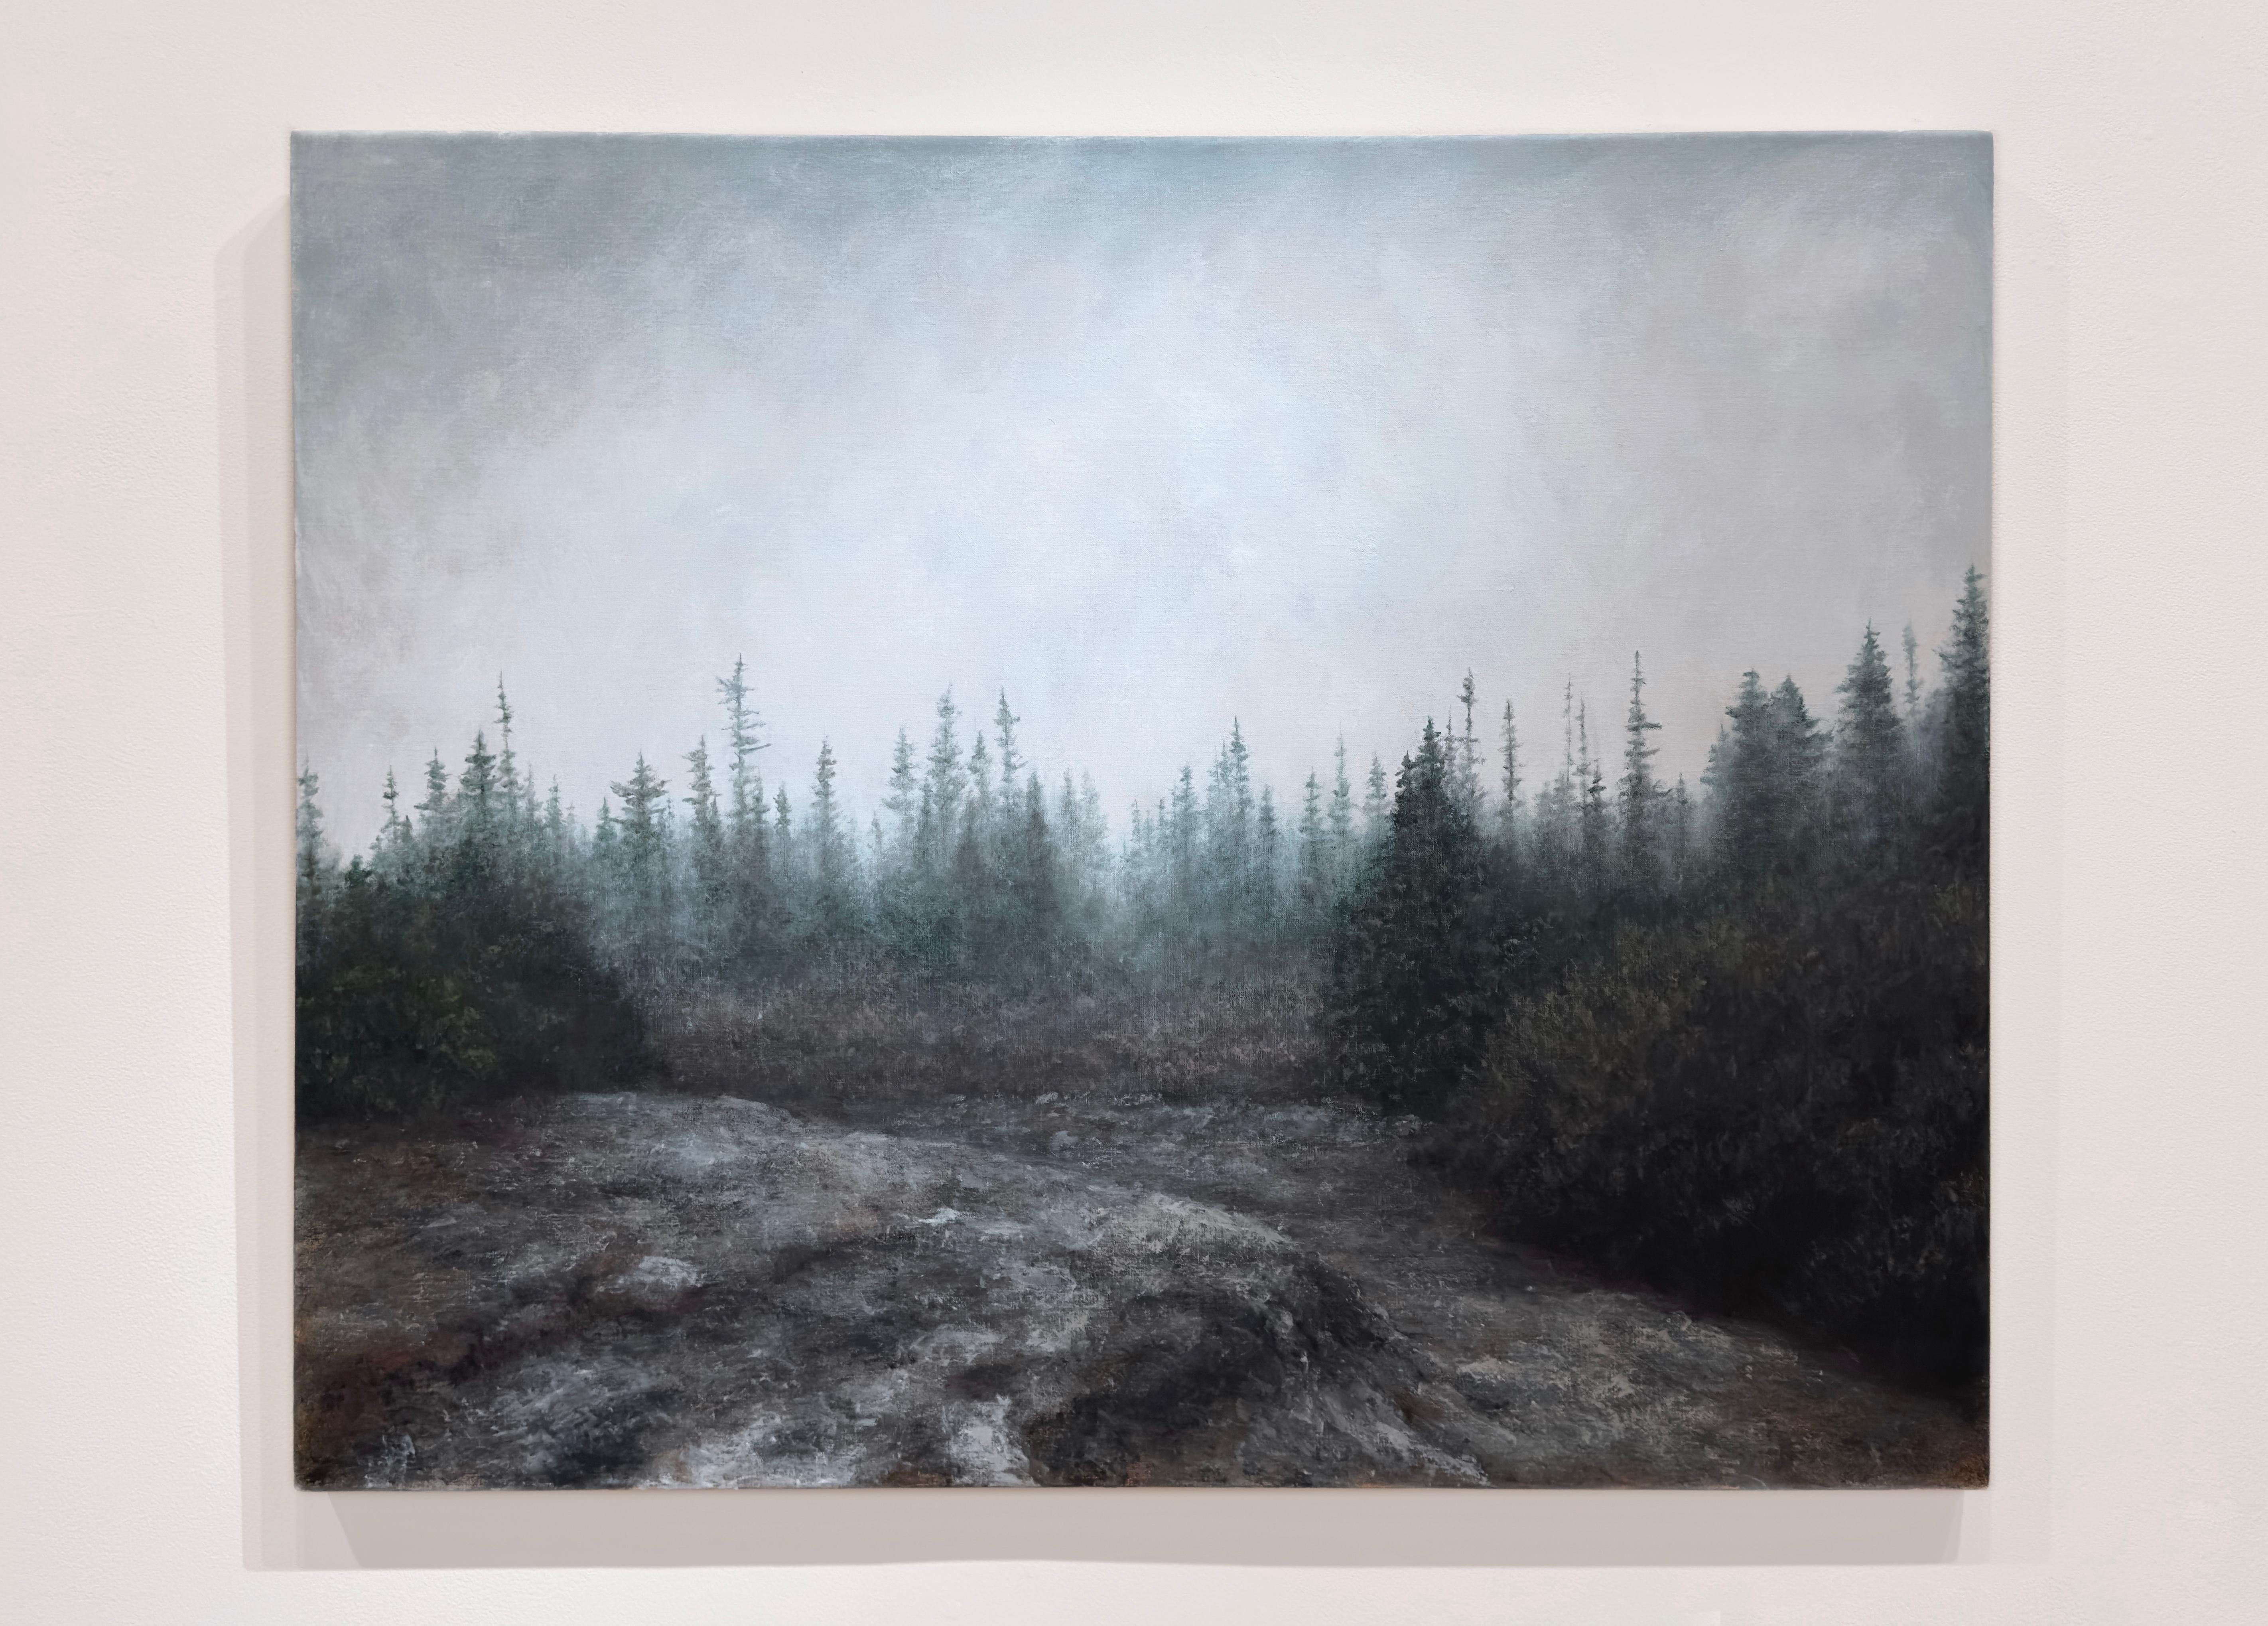 WHEN THE FOG LIFTED - Realism / Dark Landscape / Natural World  - Painting by Lisa Lebofsky